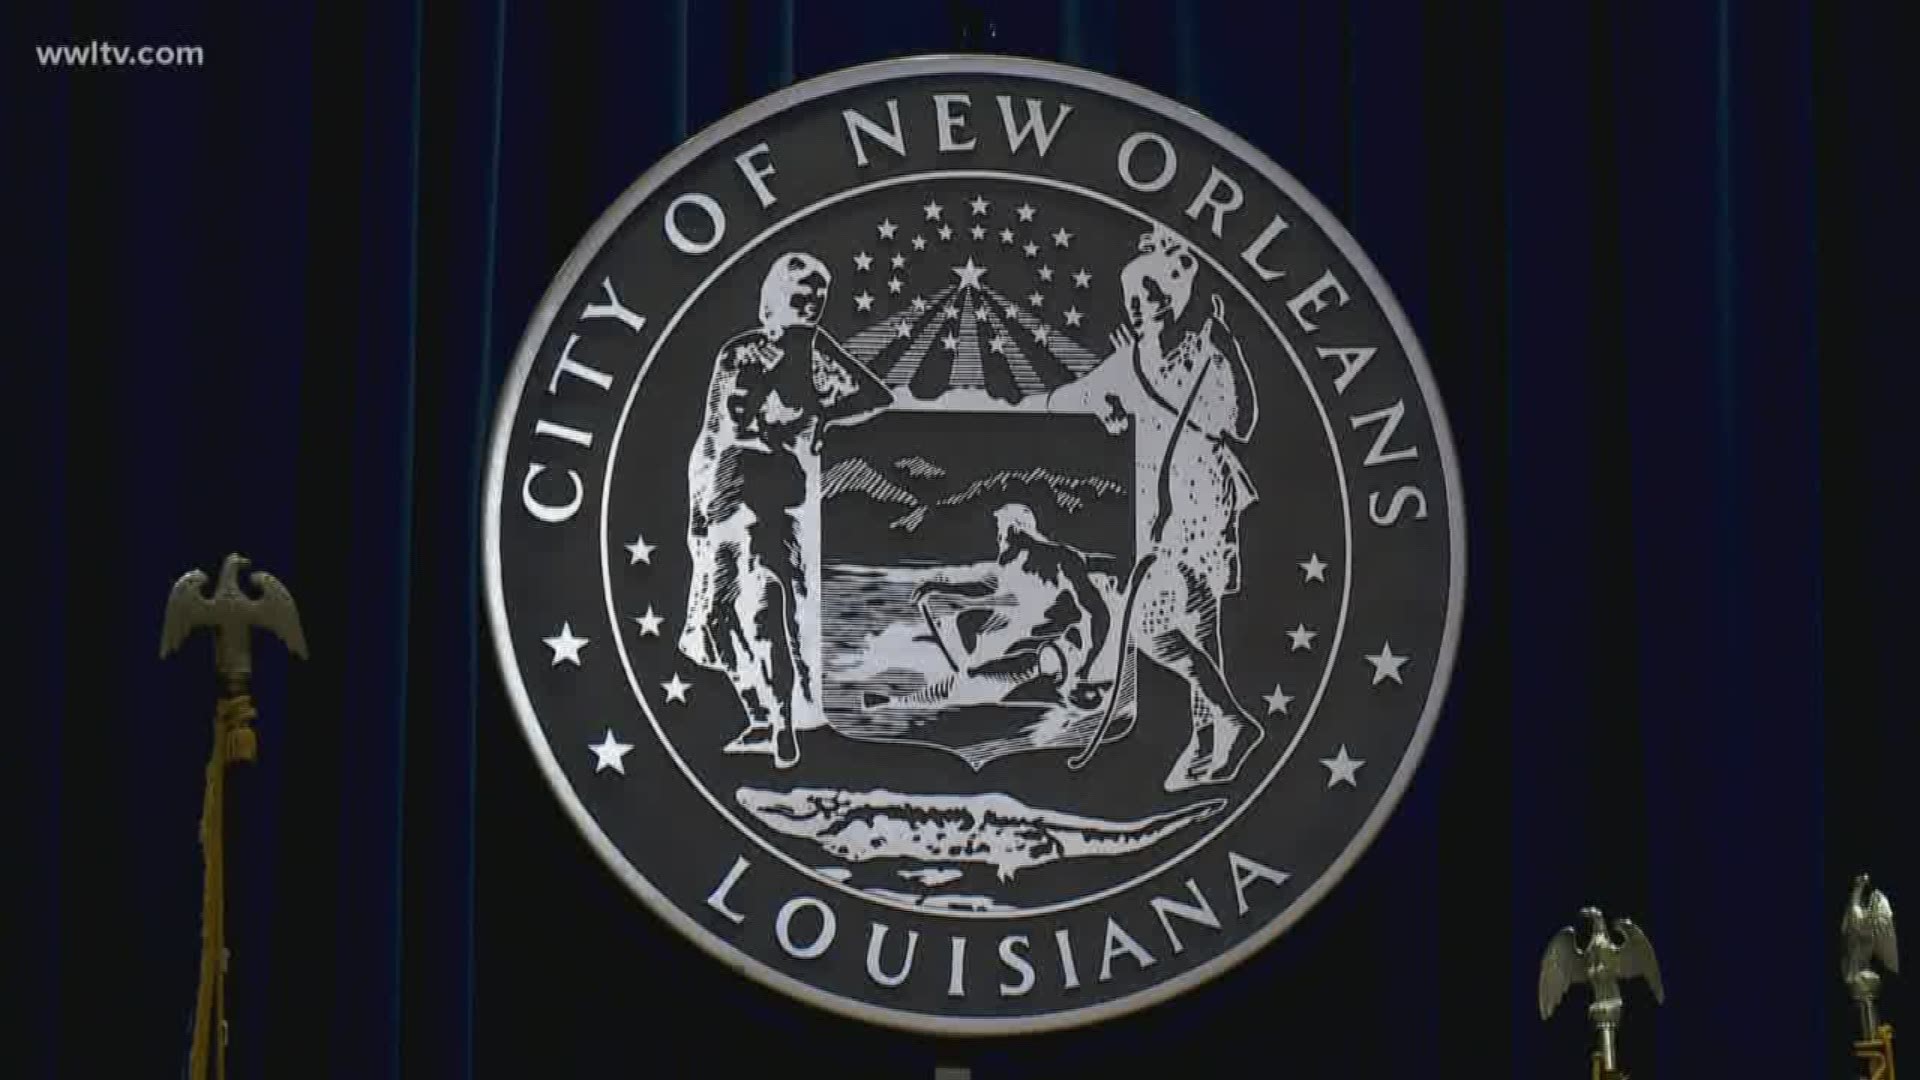 A committee of the New Orleans City Council will meet tomorrow to consider lowering utility bills for ratepayers across the city.